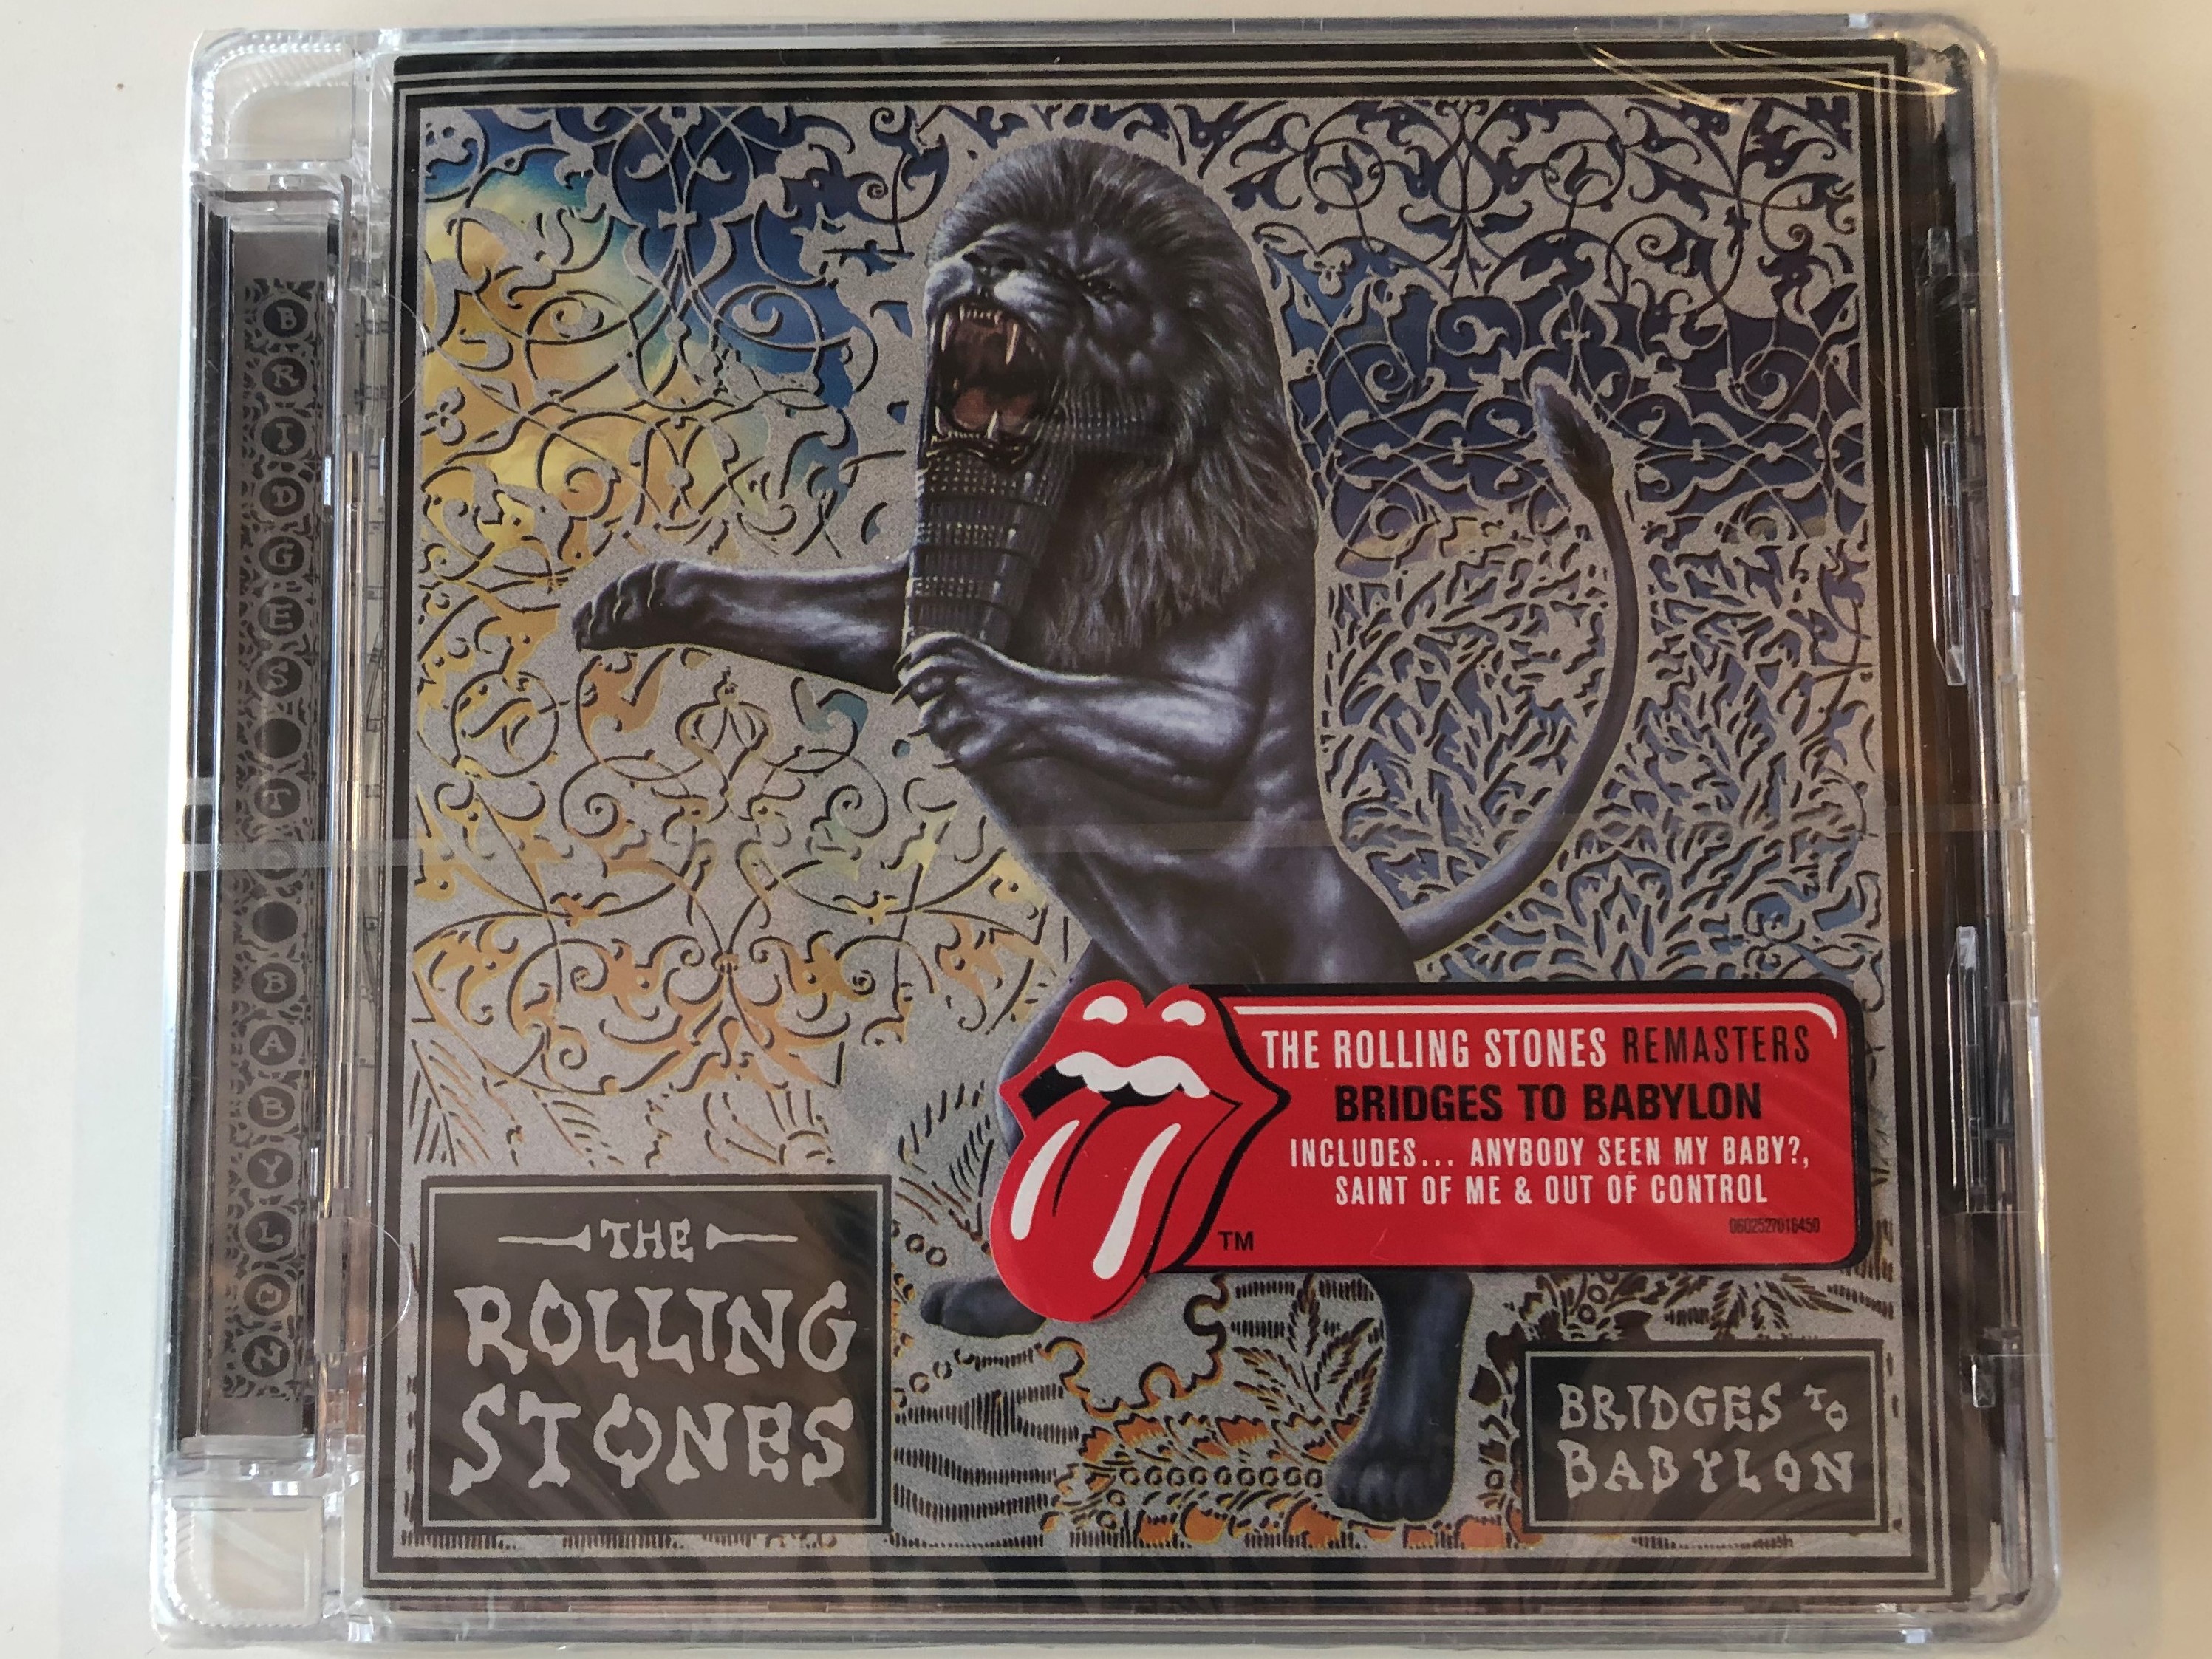 the-rolling-stones-bridges-to-babylon-includes...-anybody-seen-my-baby-saint-of-me-out-of-control-polydor-audio-cd-2009-0602527016450-1-.jpg